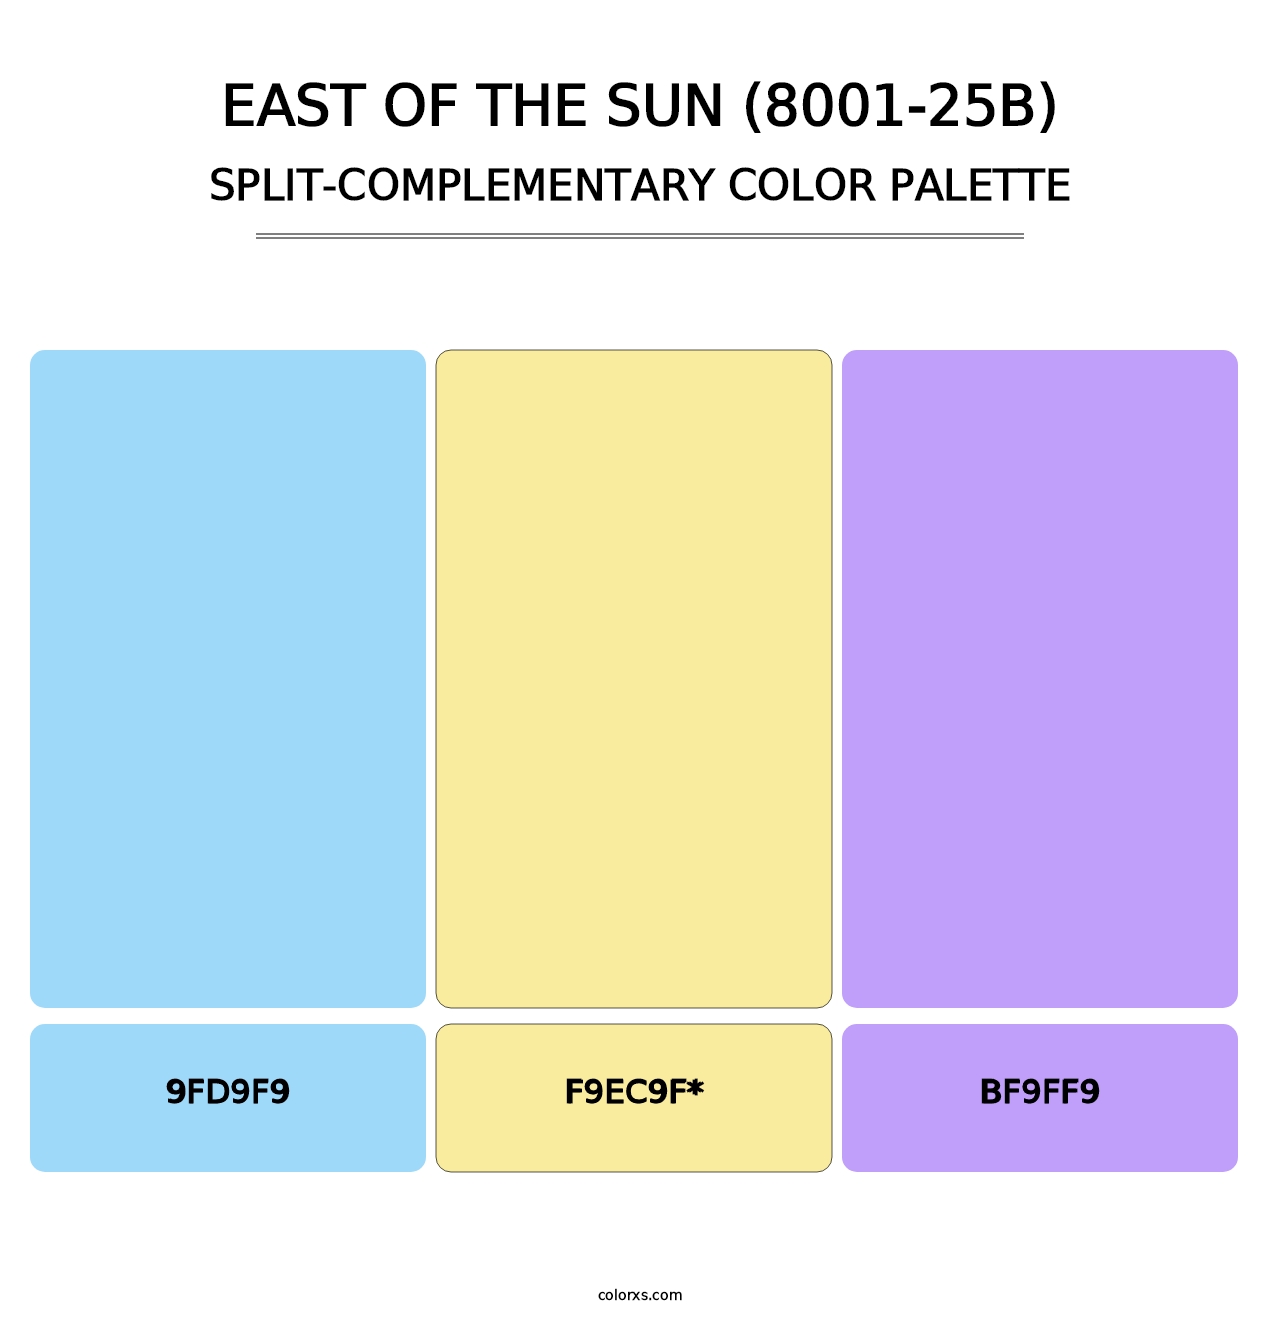 East of the Sun (8001-25B) - Split-Complementary Color Palette